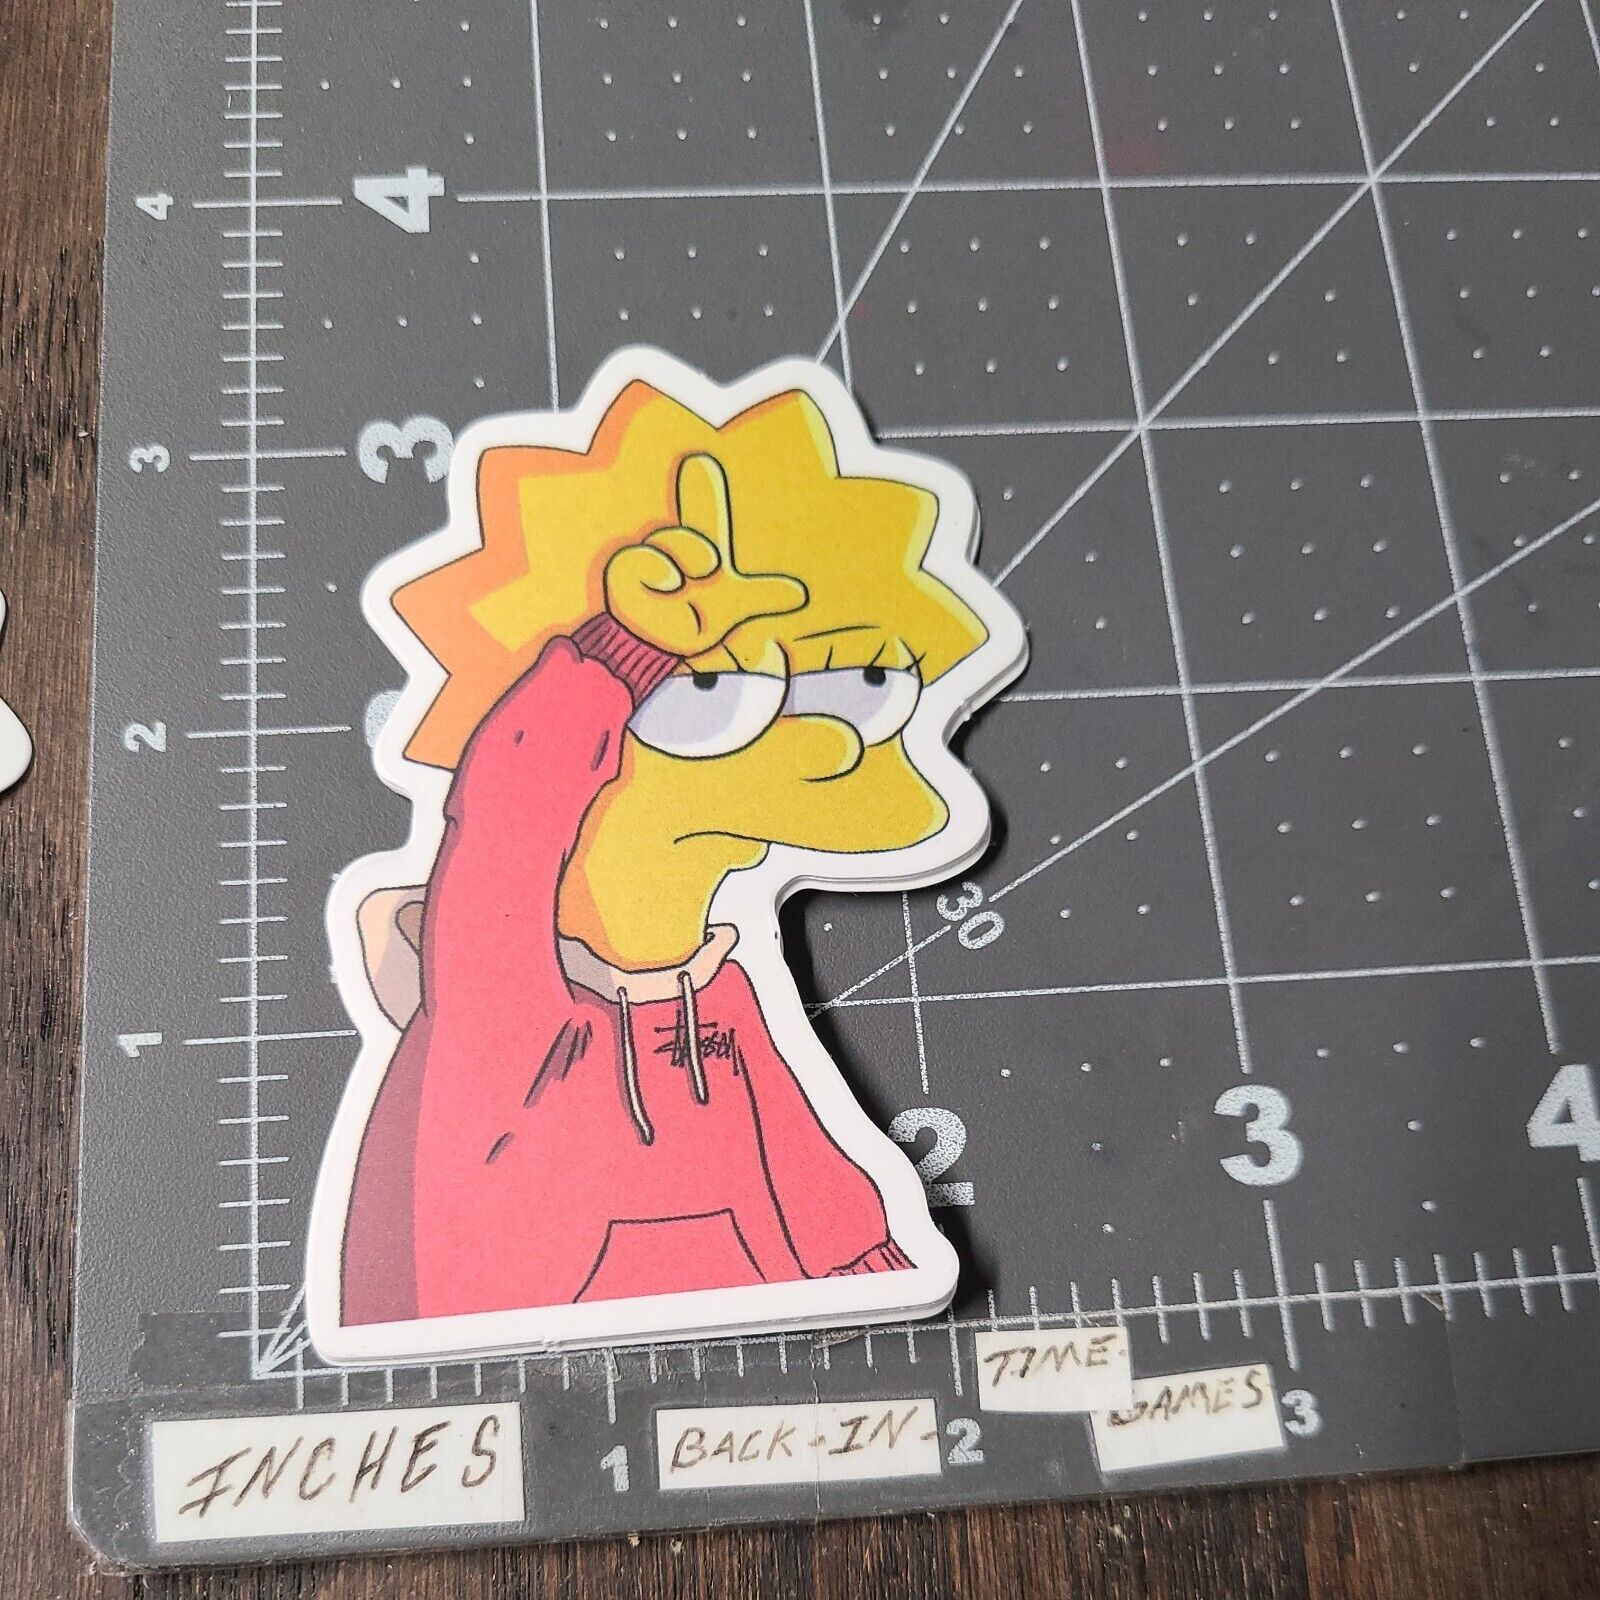 A sticker of the simpsons character is on top - Lisa Simpson